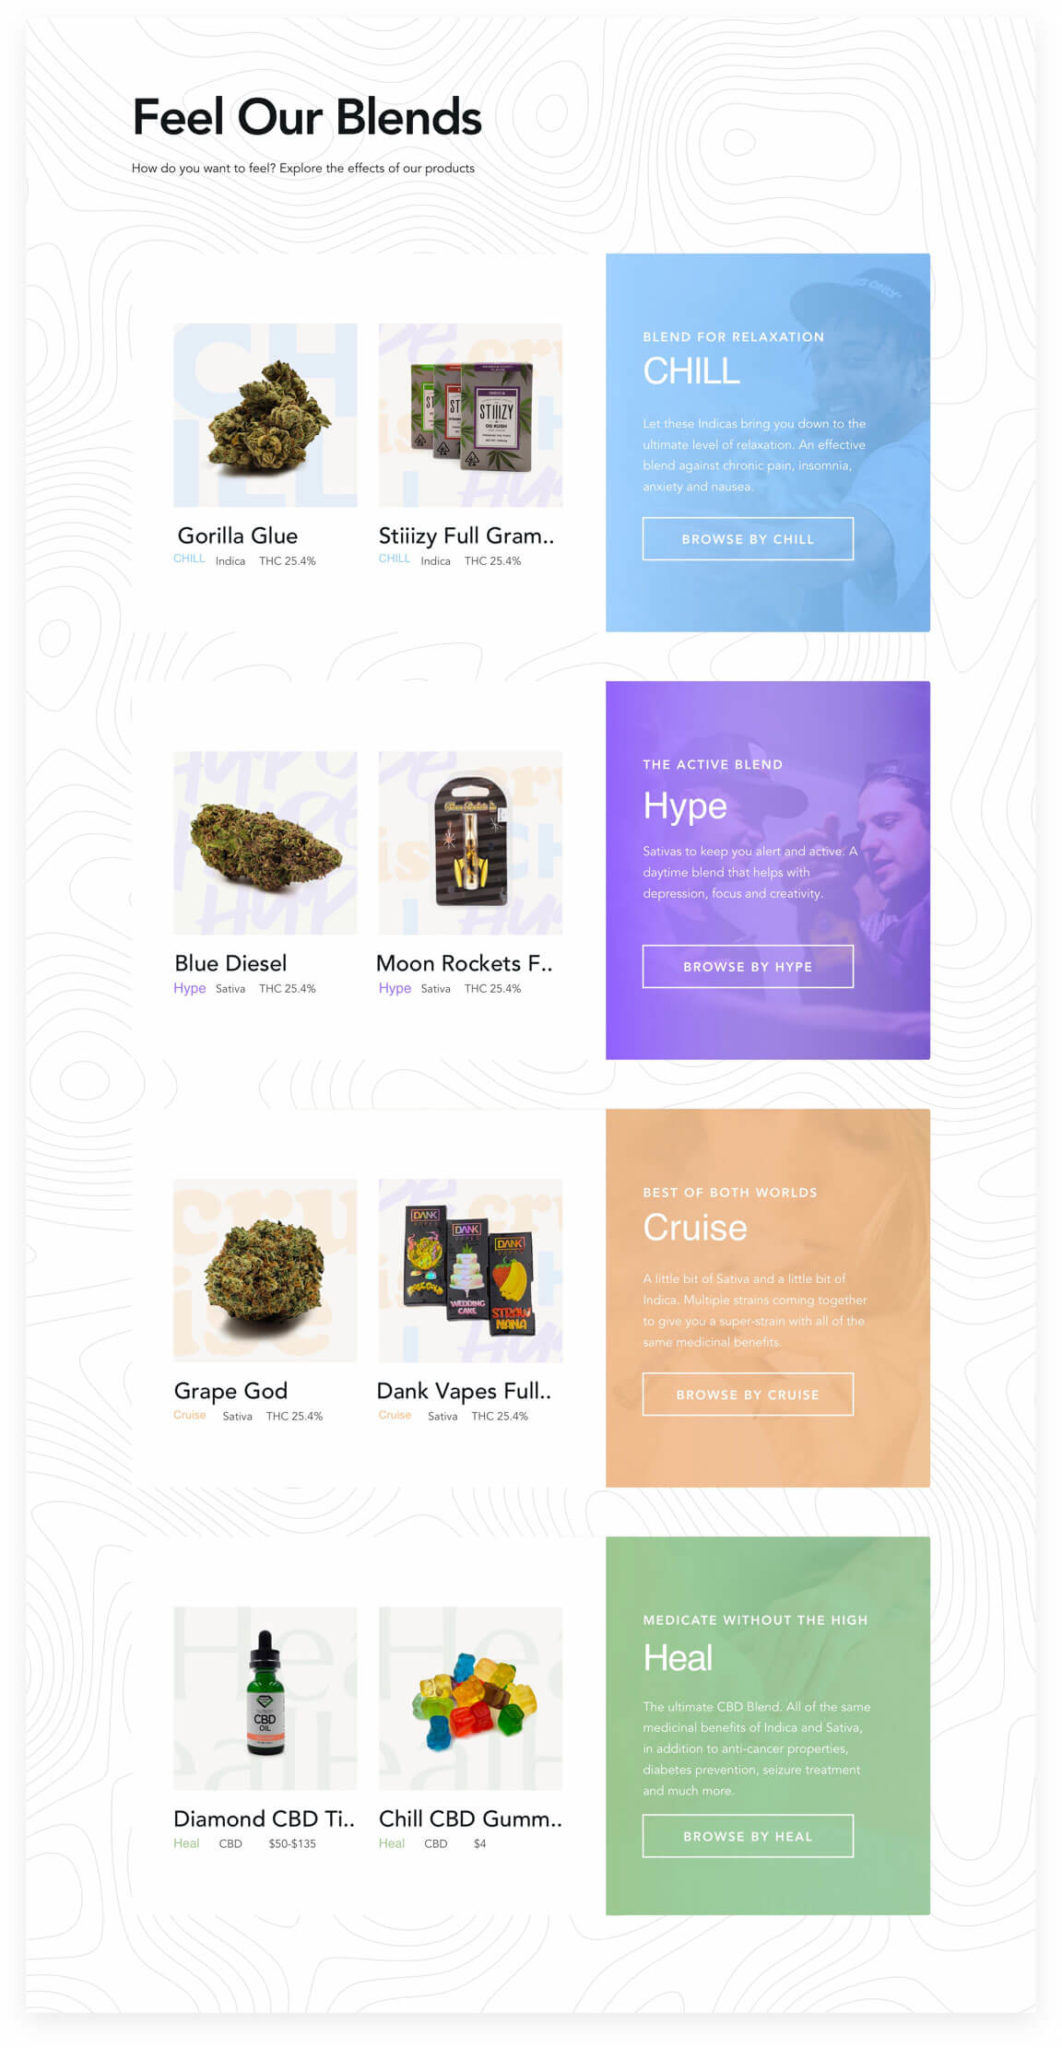 Flybud product page